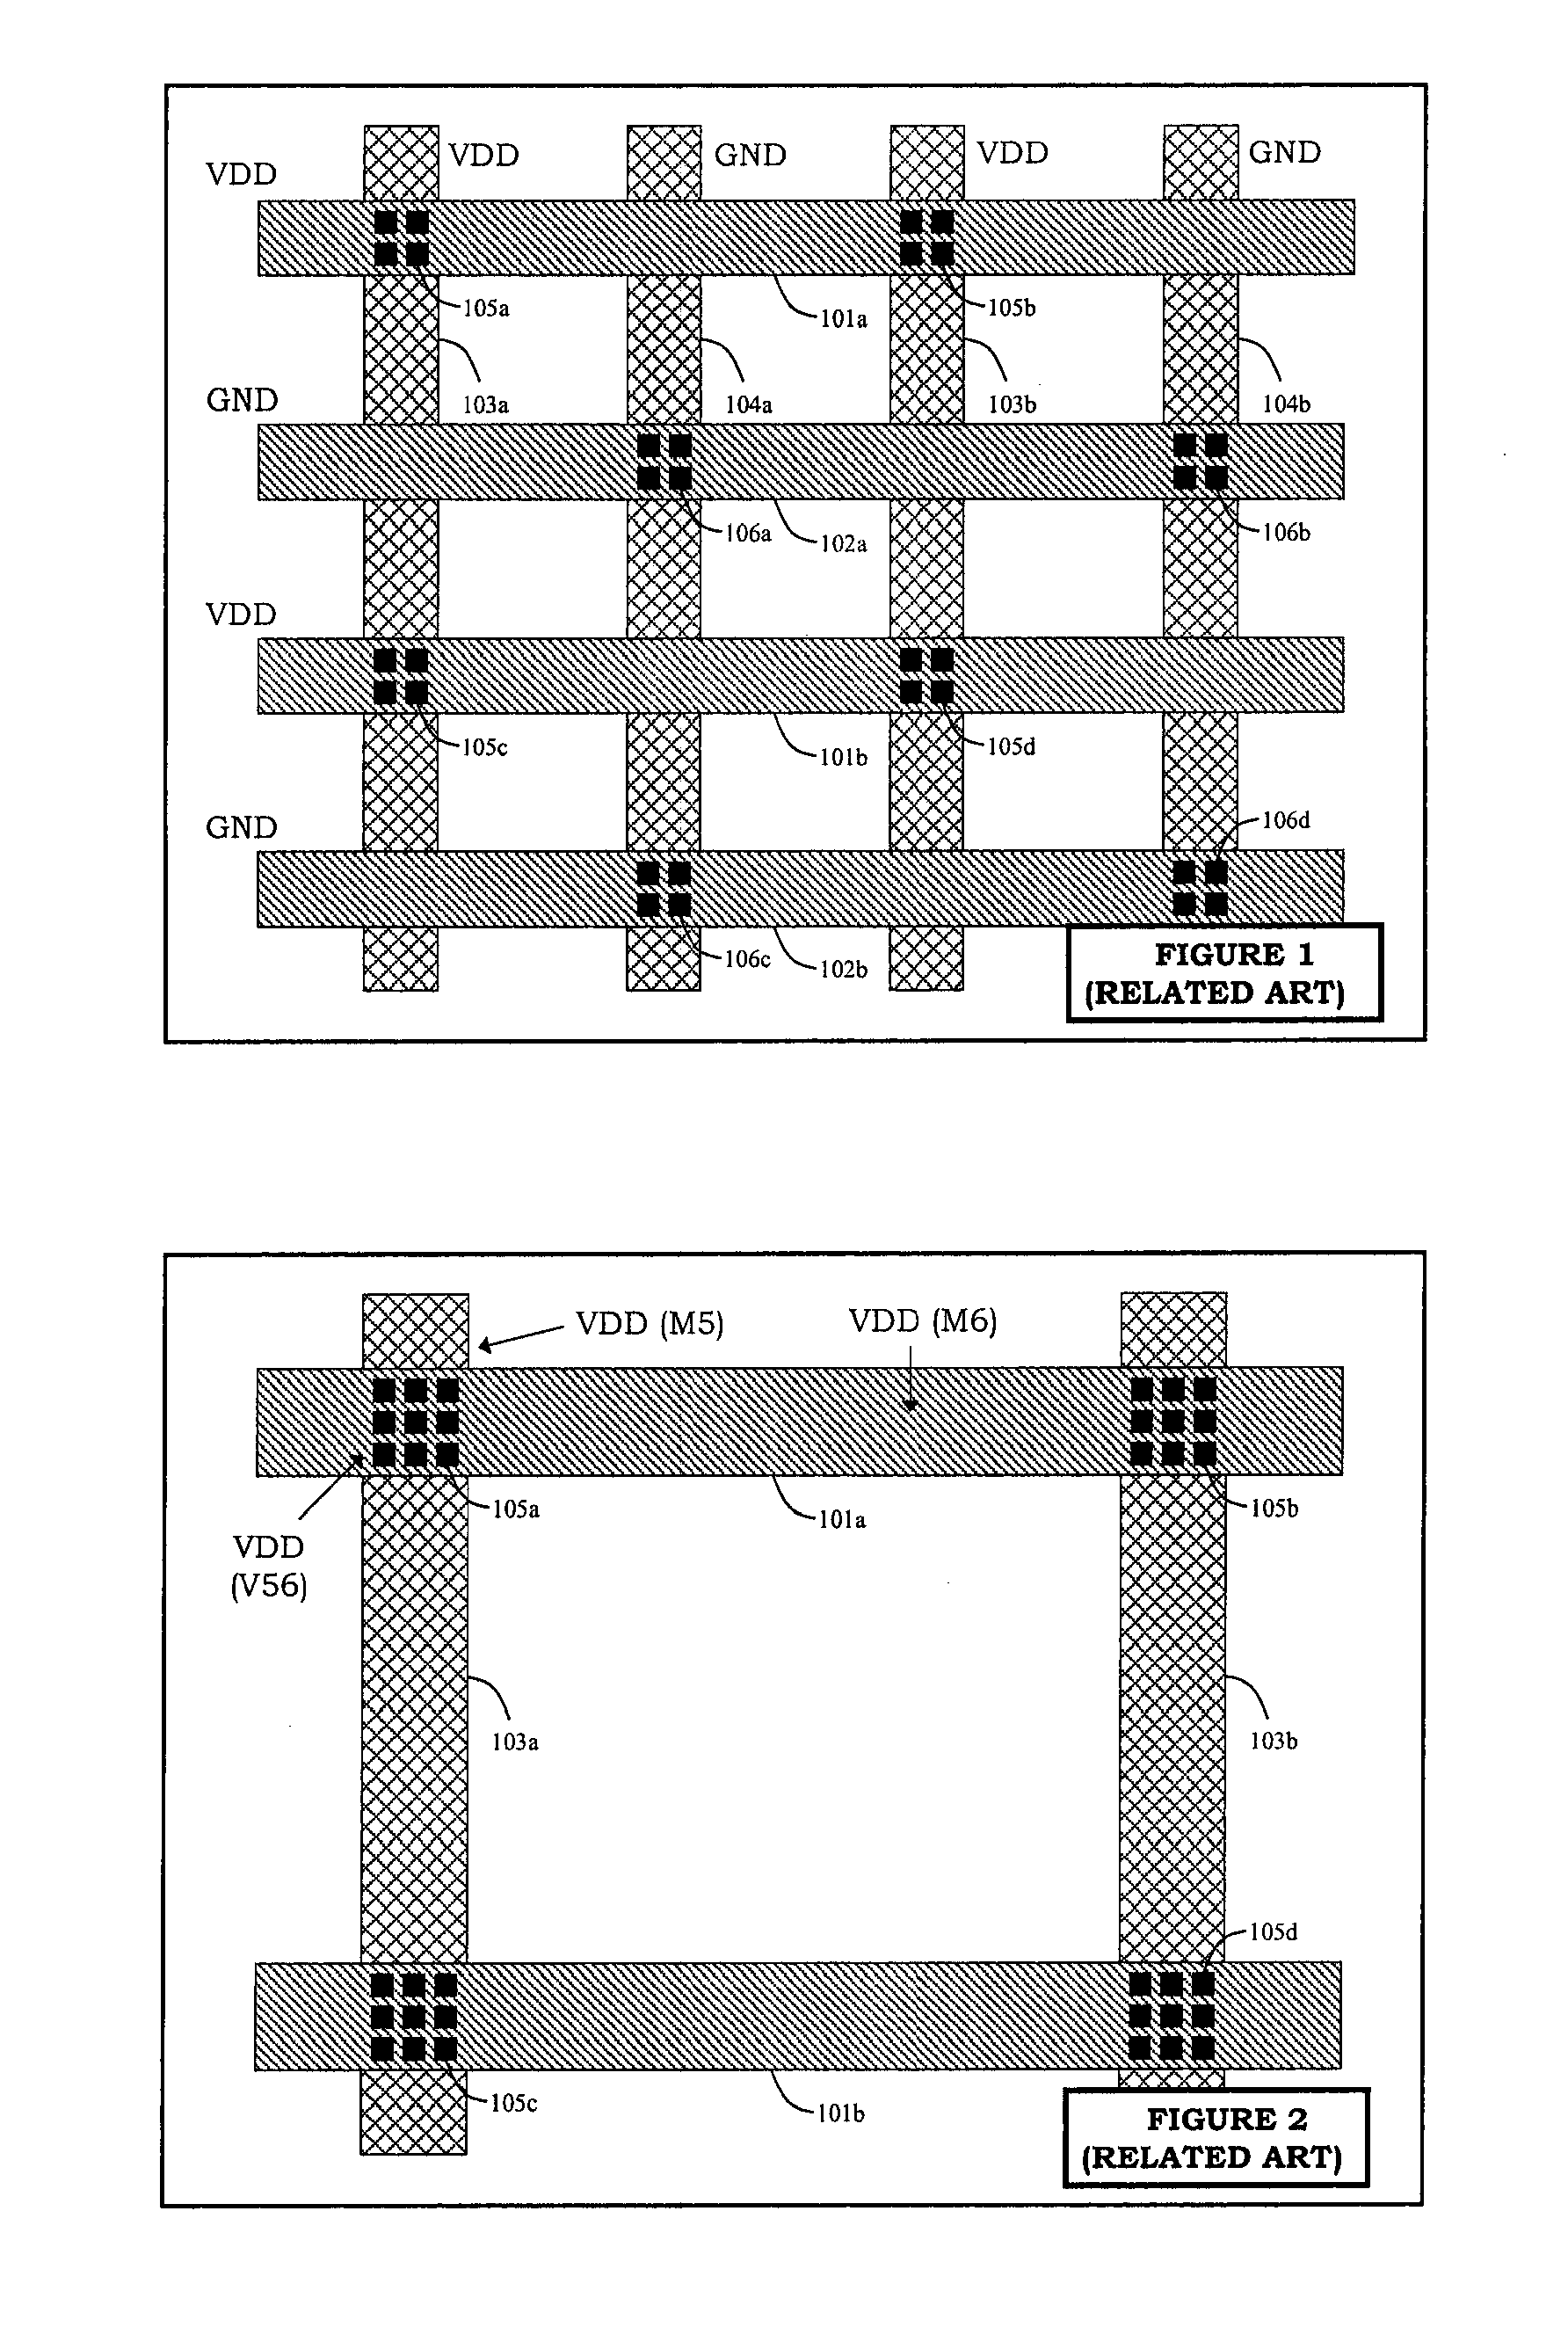 Redundantly tied metal fill for IR-drop and layout density optimization